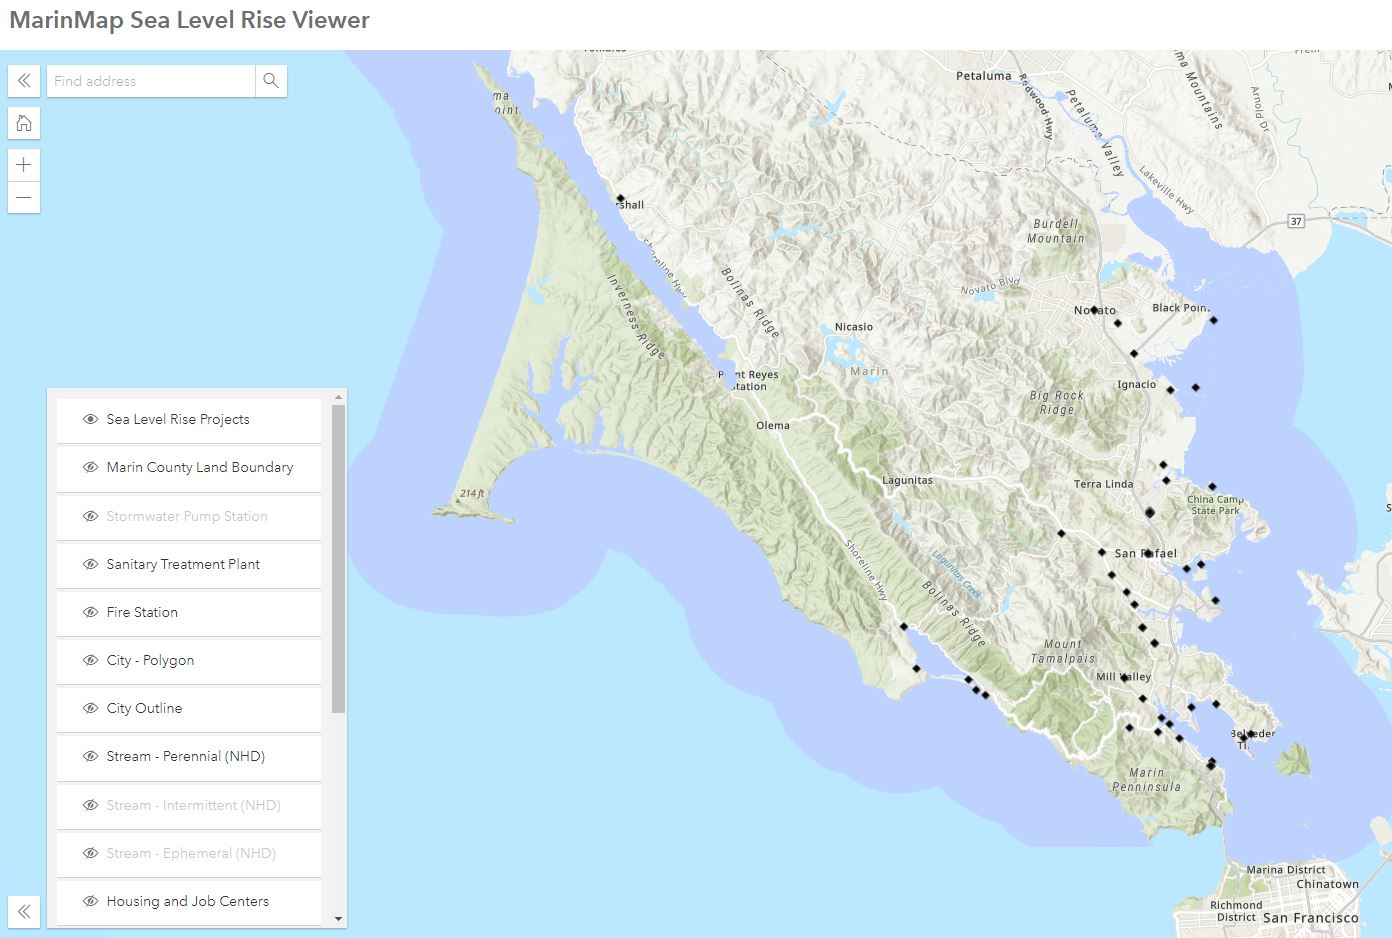 Sample screenshot of the new online Sea Level Rise Viewer app available on Marin Map